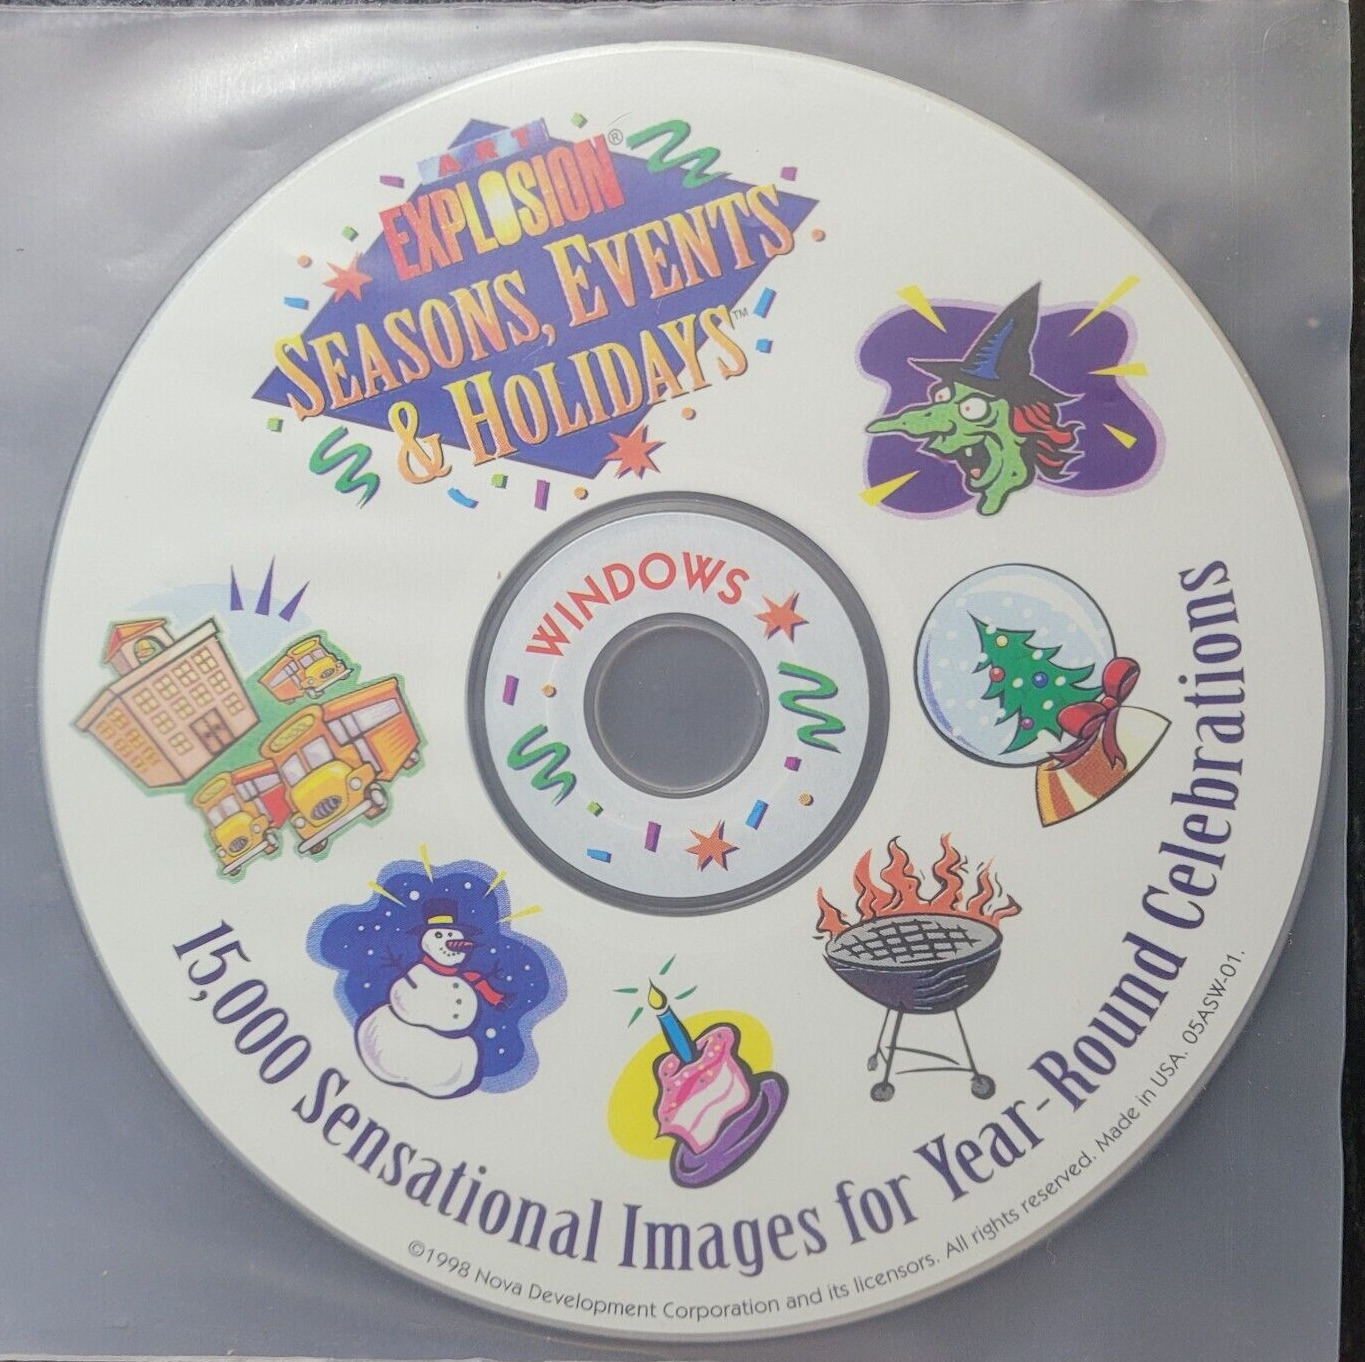 Art Explosion Seasons, Events & Holidays Clip Art Images Windows PC Software CD-